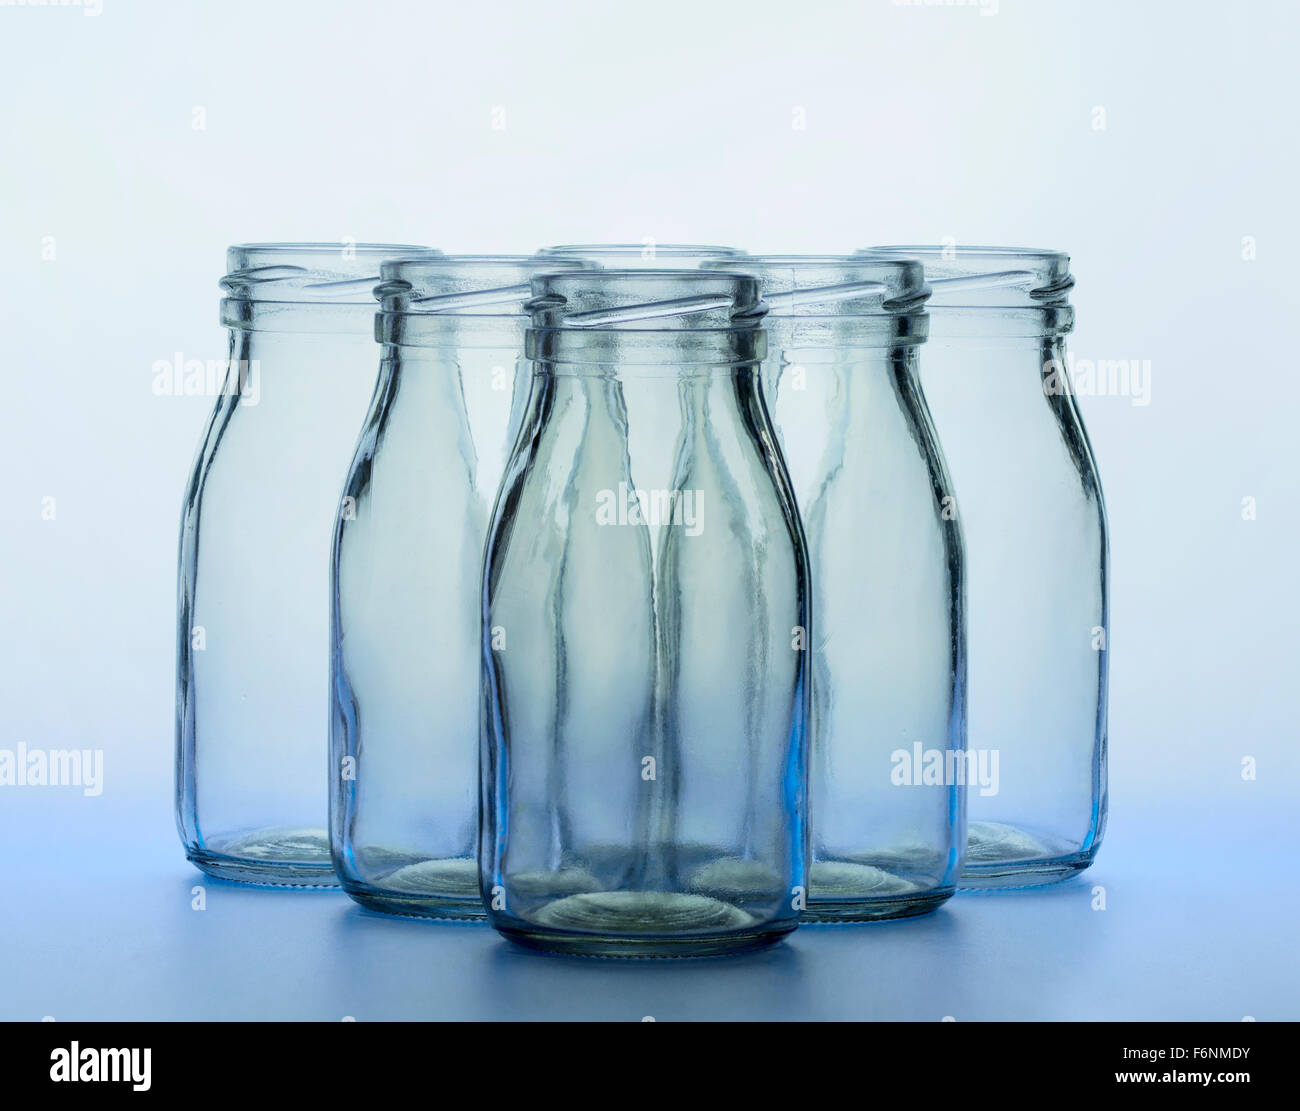 https://c8.alamy.com/comp/F6NMDY/blue-milk-bottles-6-standing-in-formation-recession-of-focus-triangular-F6NMDY.jpg